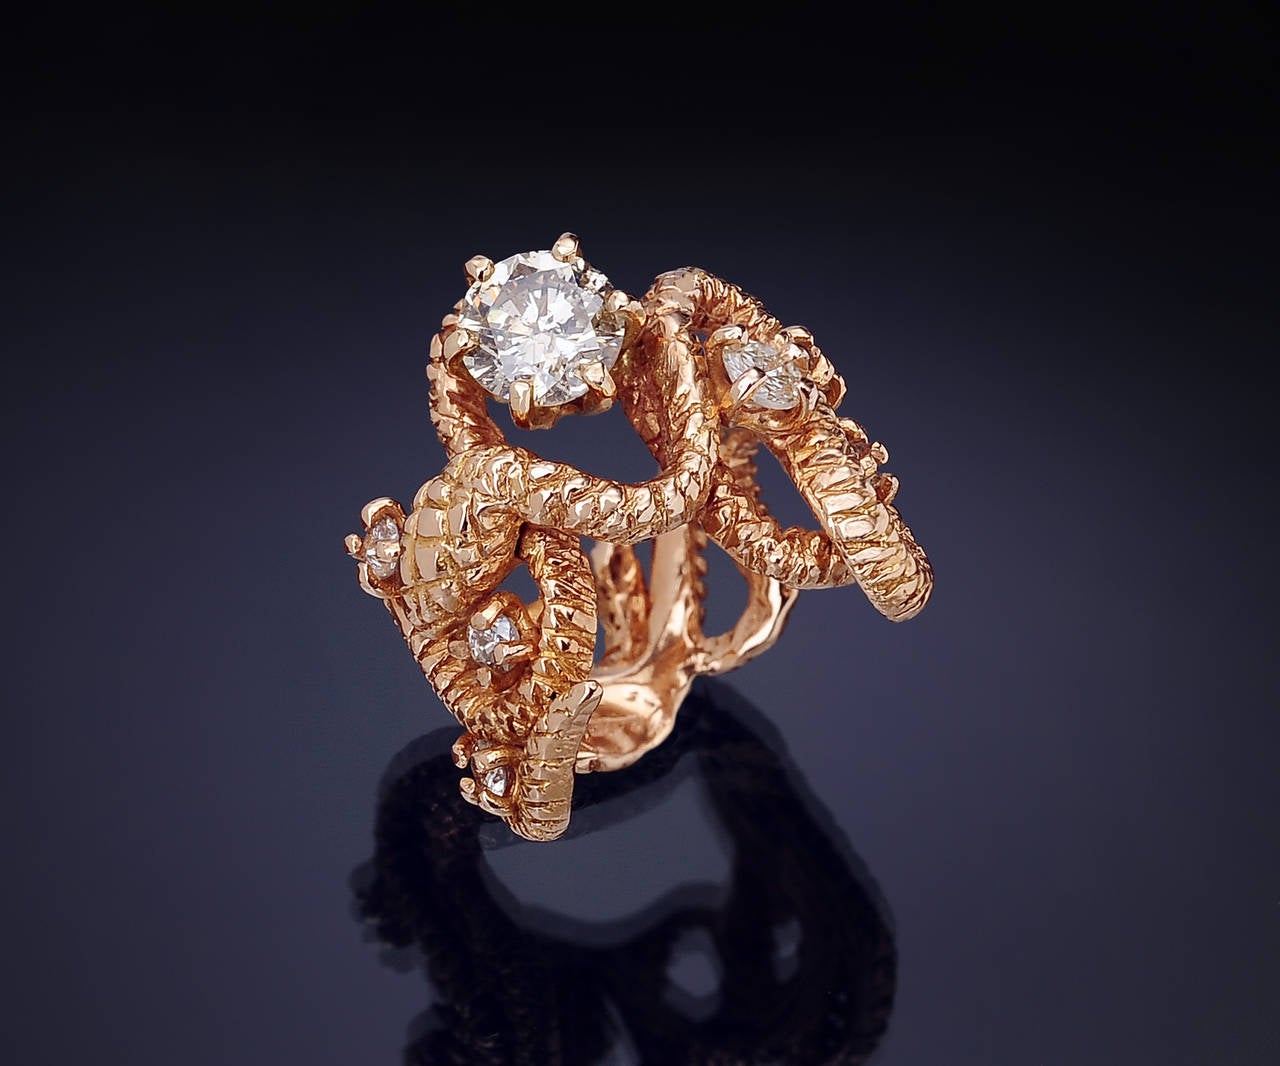 Modern Diamonds Rose 18K Gold Snake Ring Handcrafted In Italy By Botta Gioielli